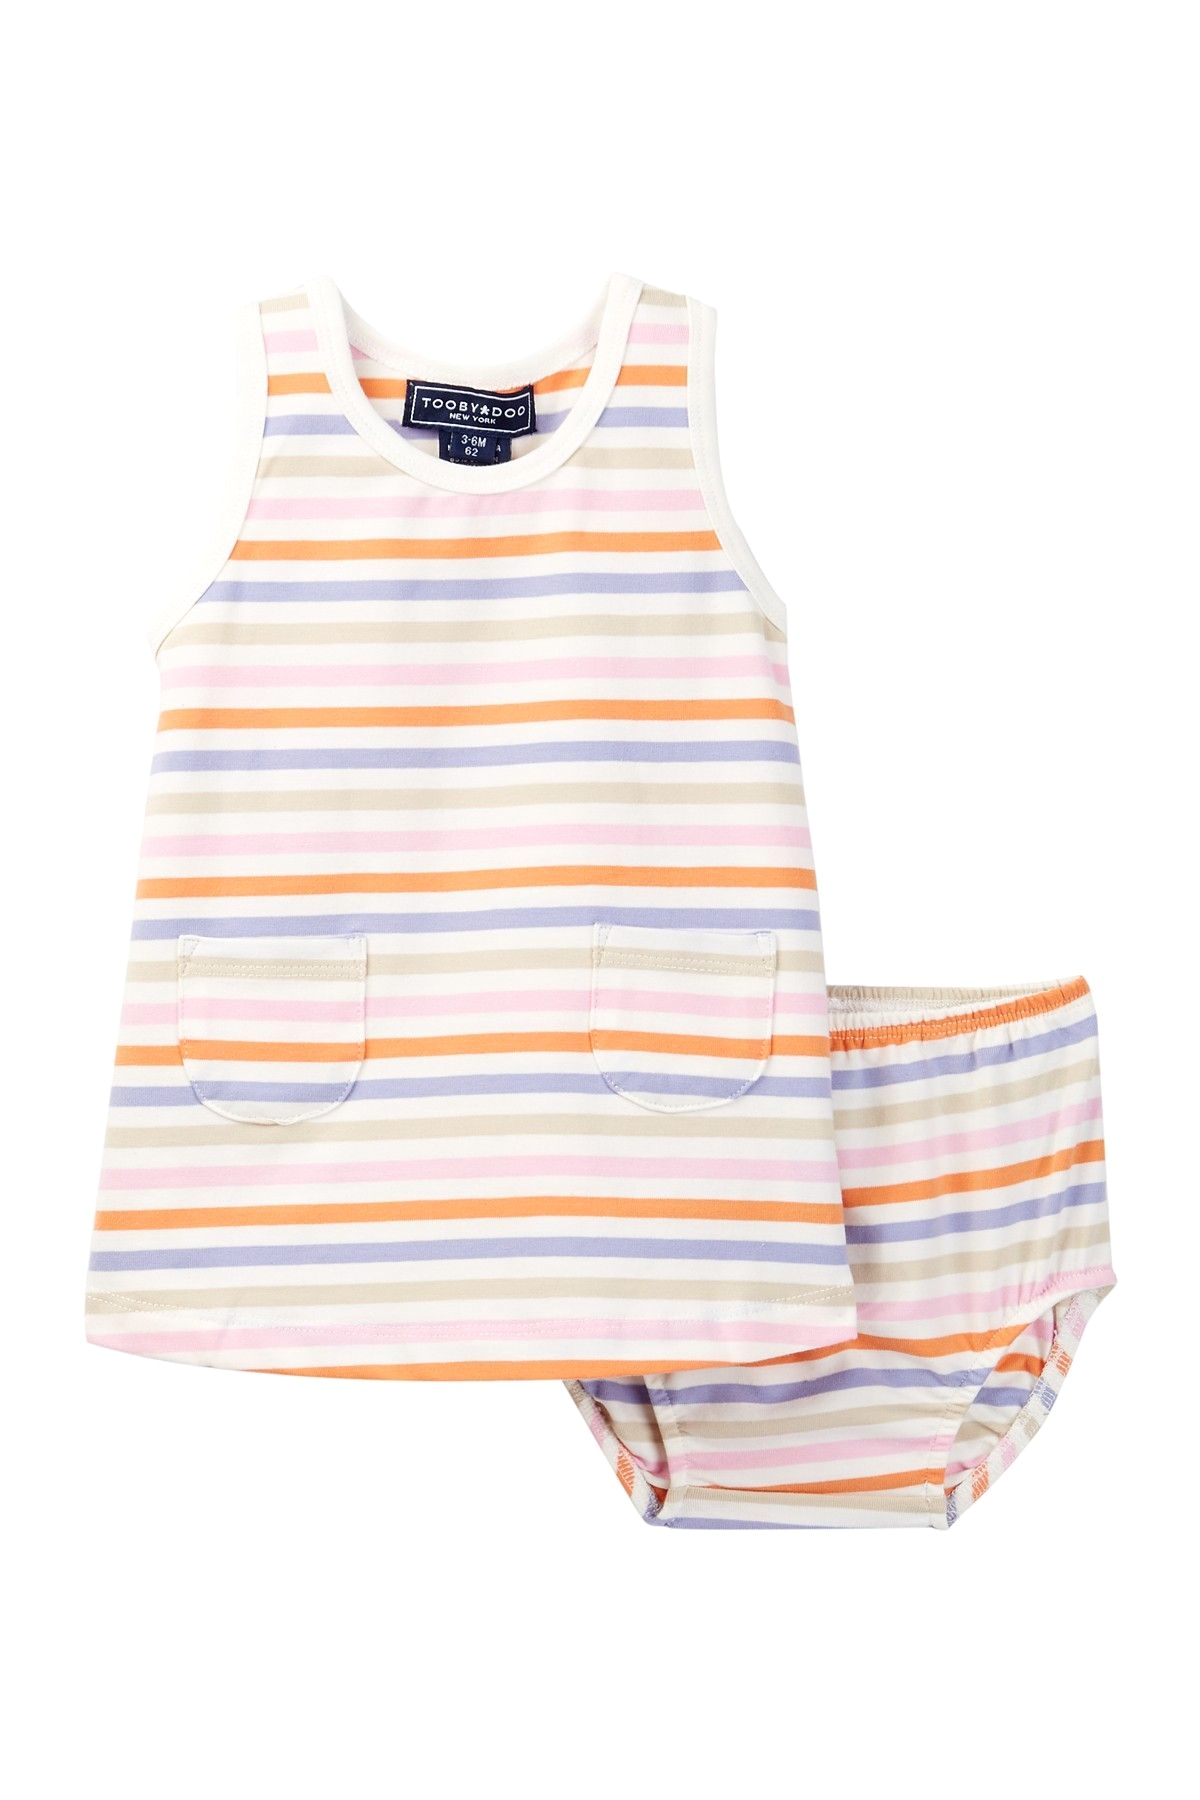 toobydoo pastel striped dress baby girls at nordstrom rack free shipping on